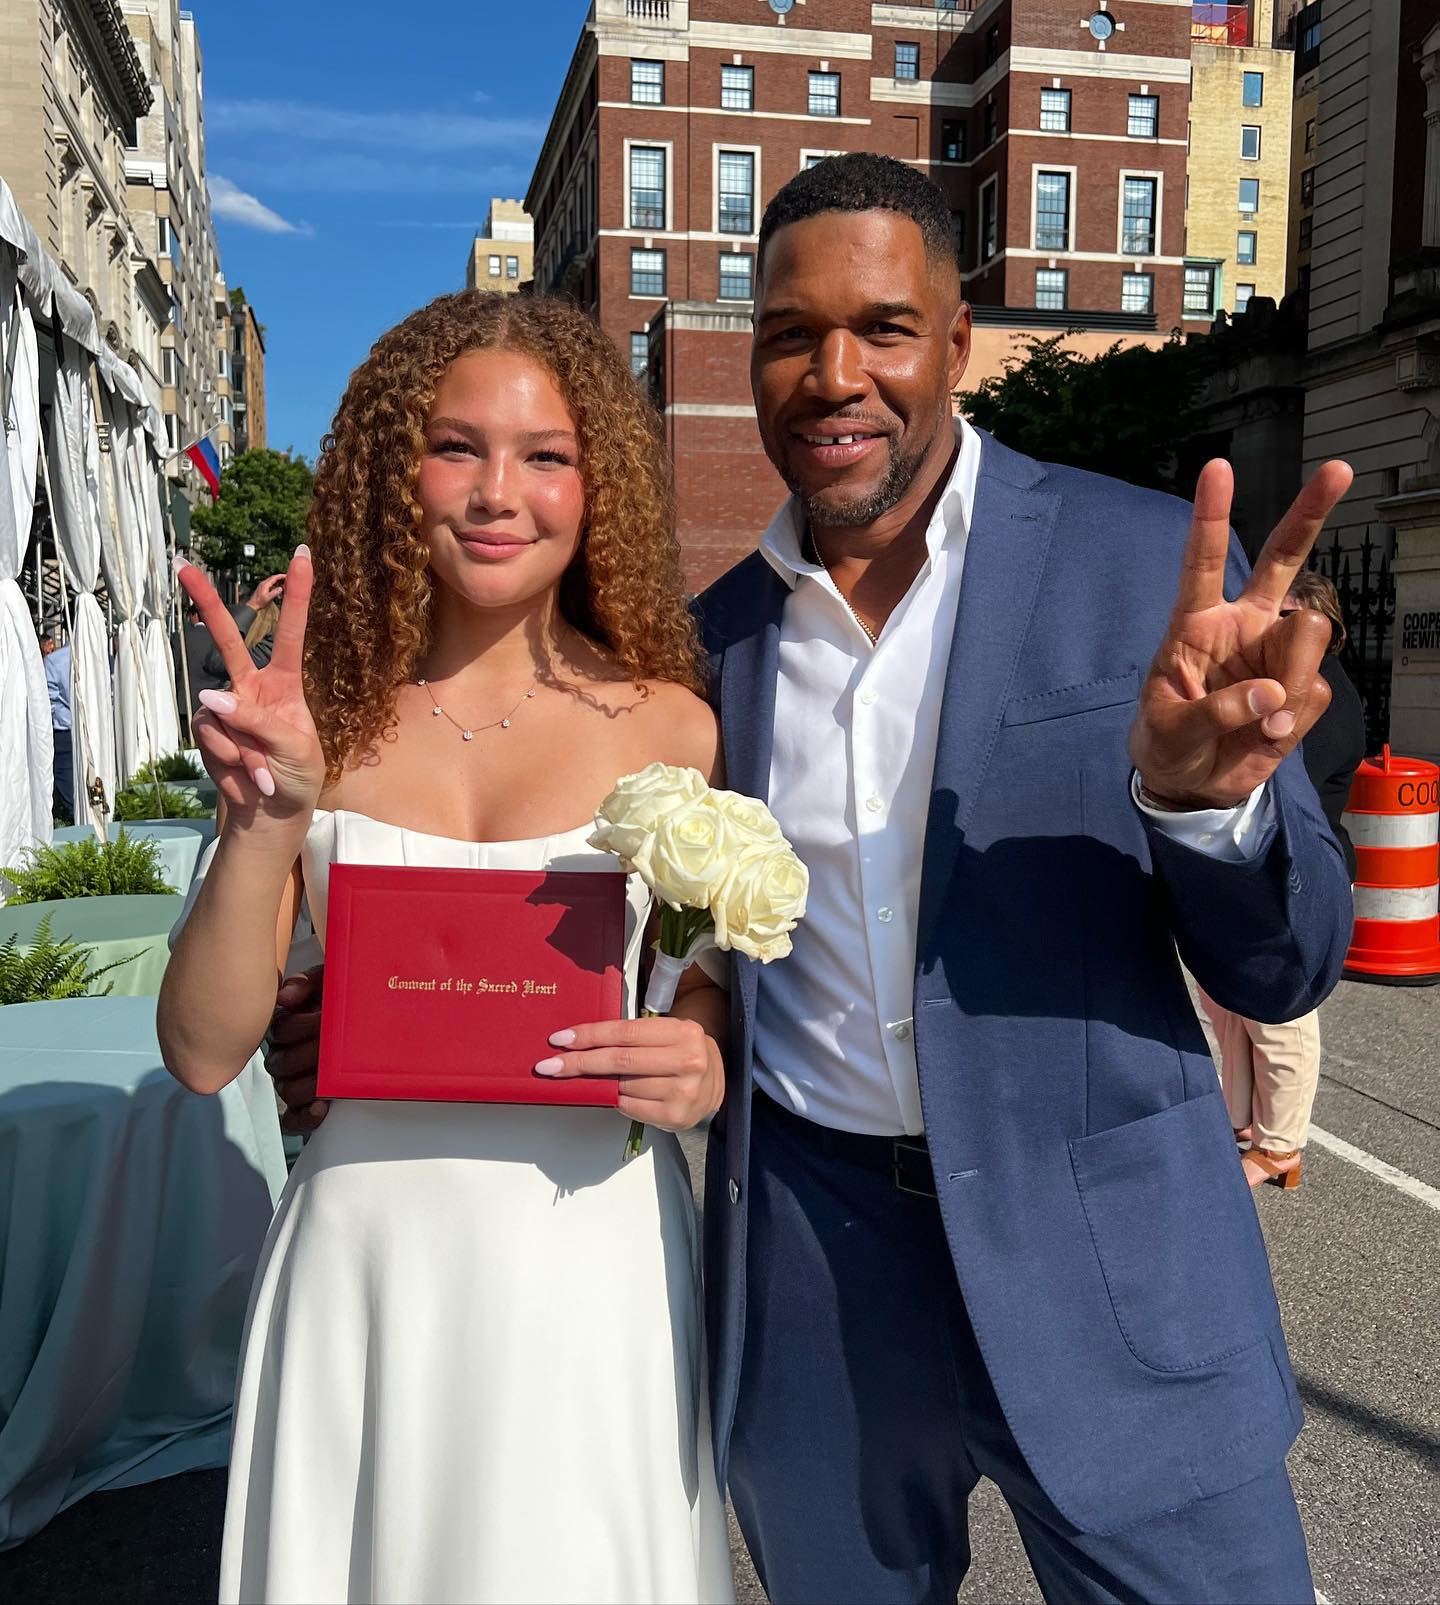 Michael took to Instagram to commemorate his daughter's graduation from high school and show excitement over her upcoming enrollment